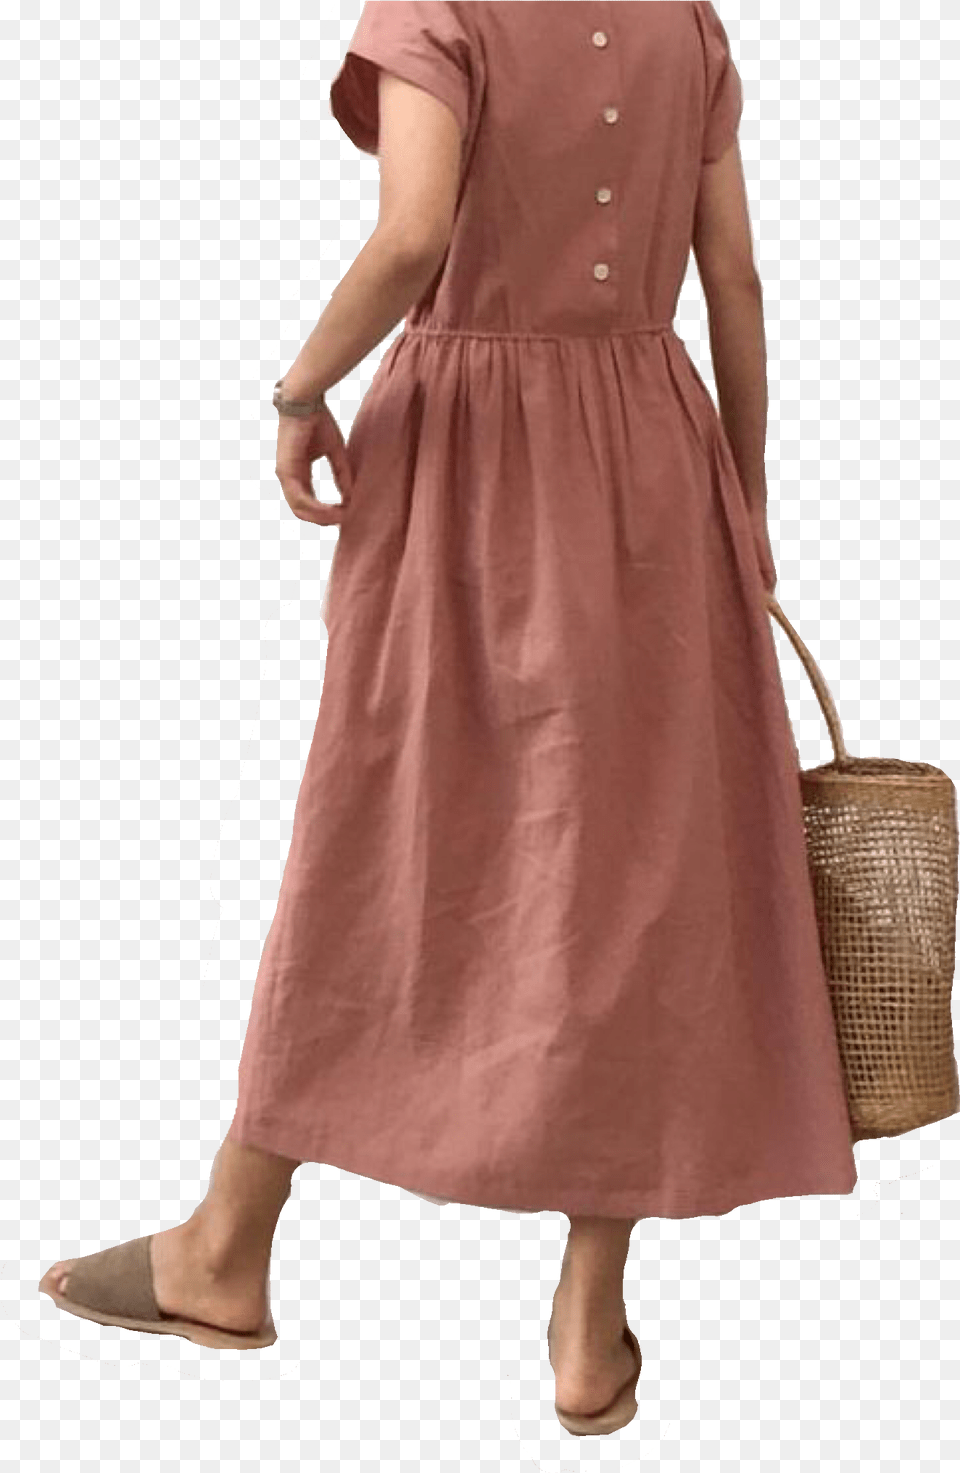 Dress Dress Skirt Pink Skirts Mbs Pink Outfits Gown, Clothing, Sleeve, Linen, Home Decor Png